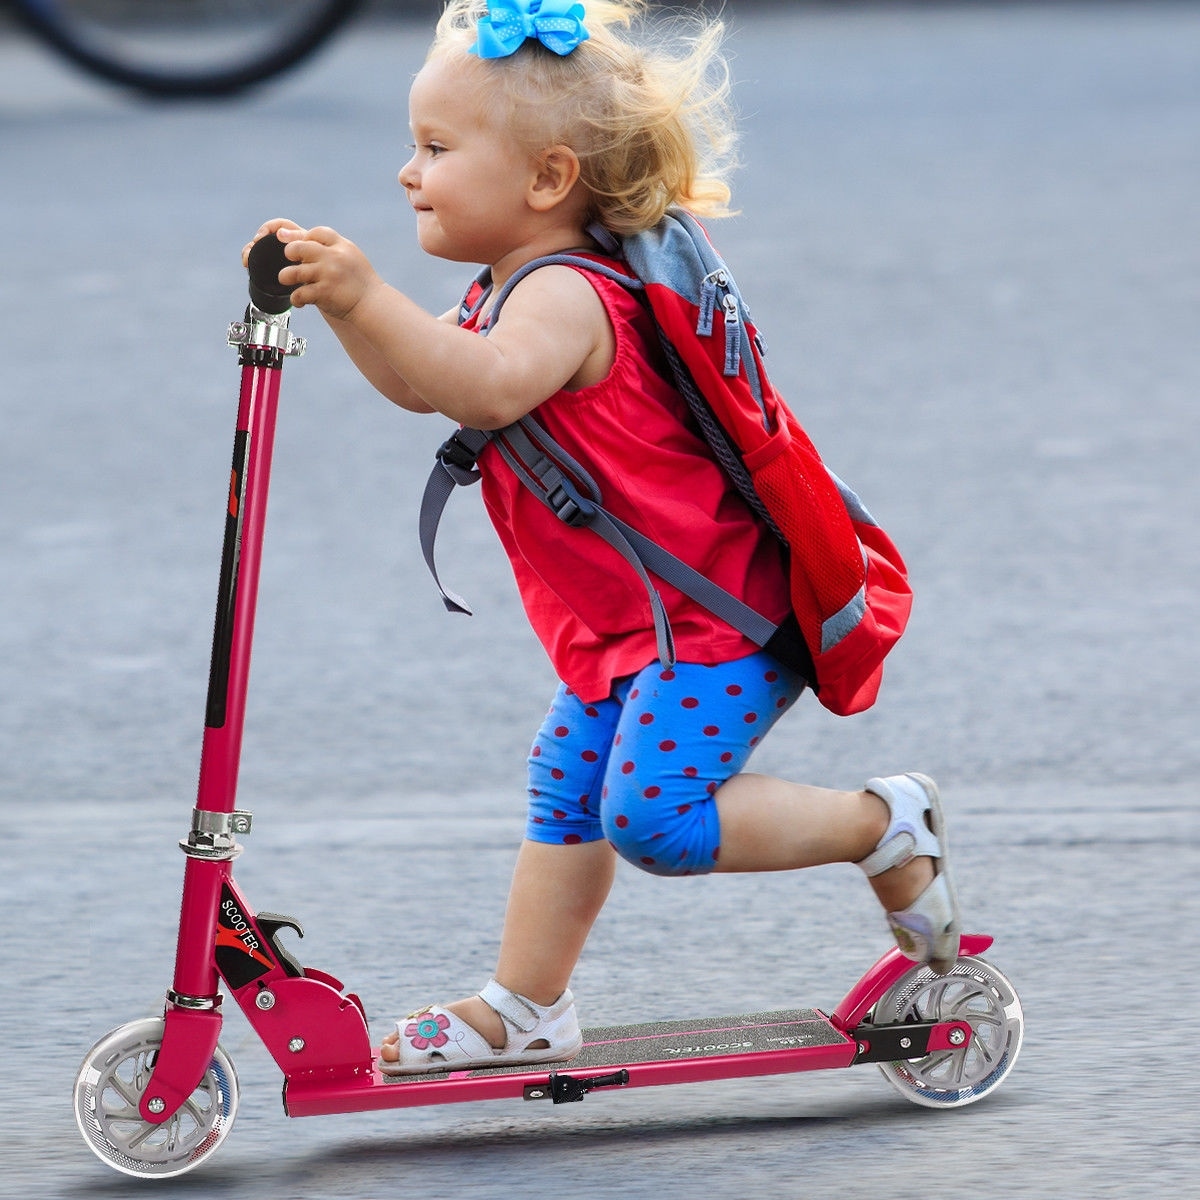 foldable children's scooters